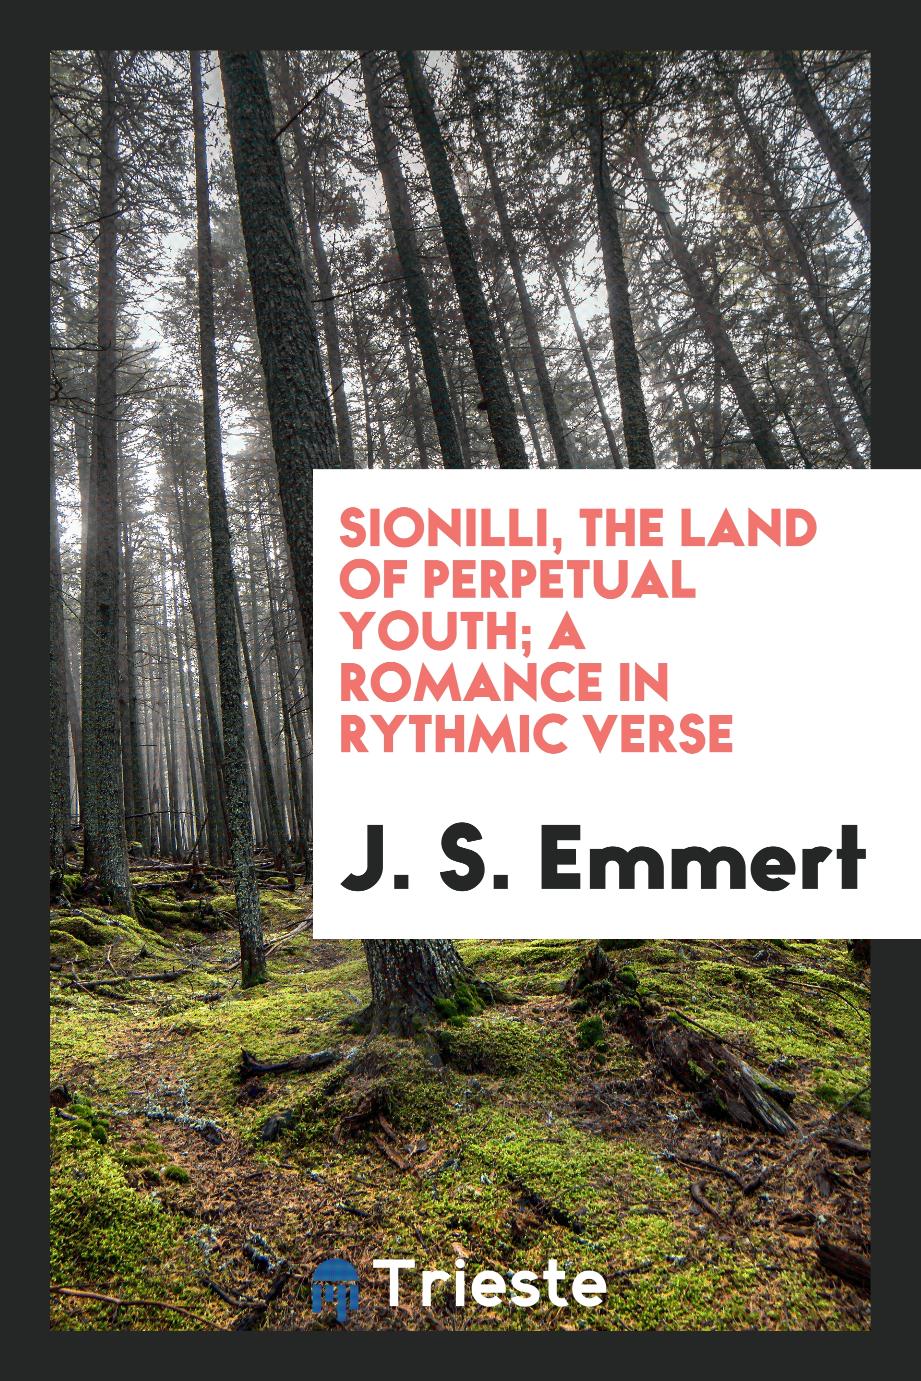 Sionilli, the land of perpetual youth; a romance in rythmic verse